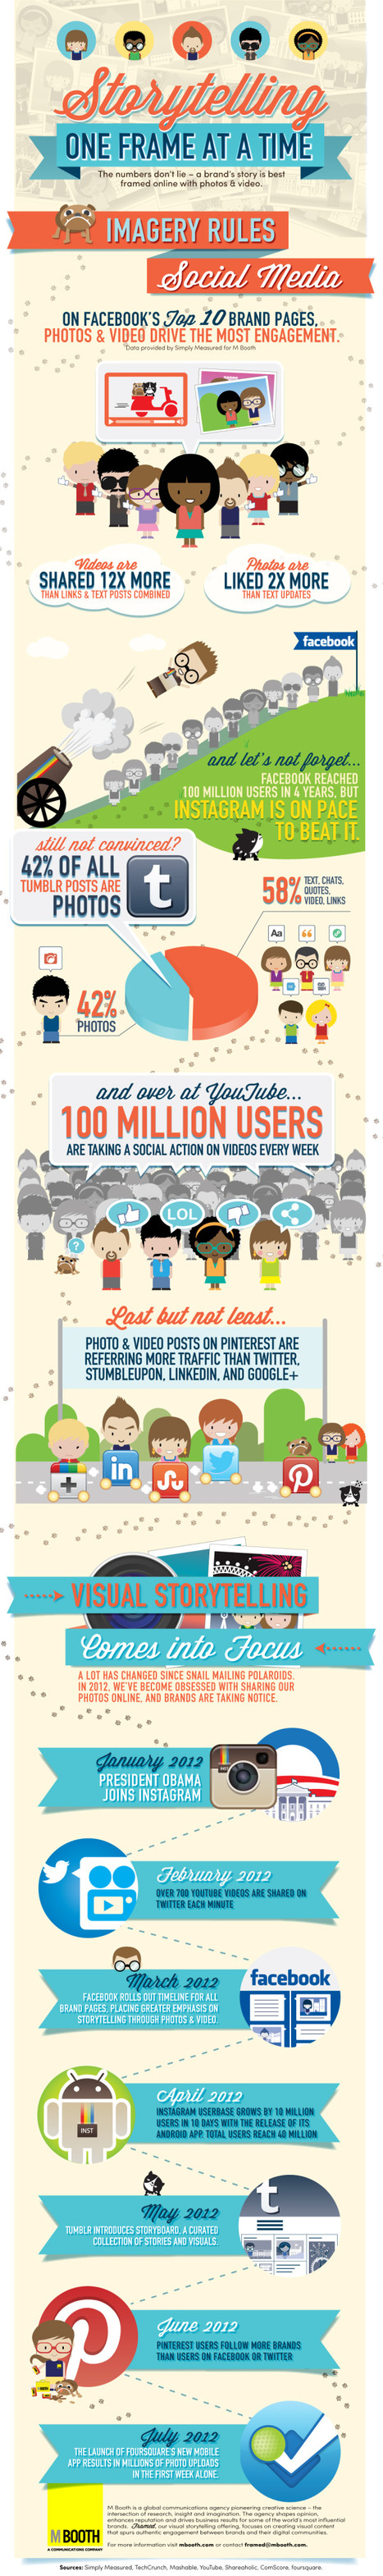 Visual Content Trumps Text in Driving Social Media Engagement [INFOGRAPHIC] | Doctor Data | Scoop.it